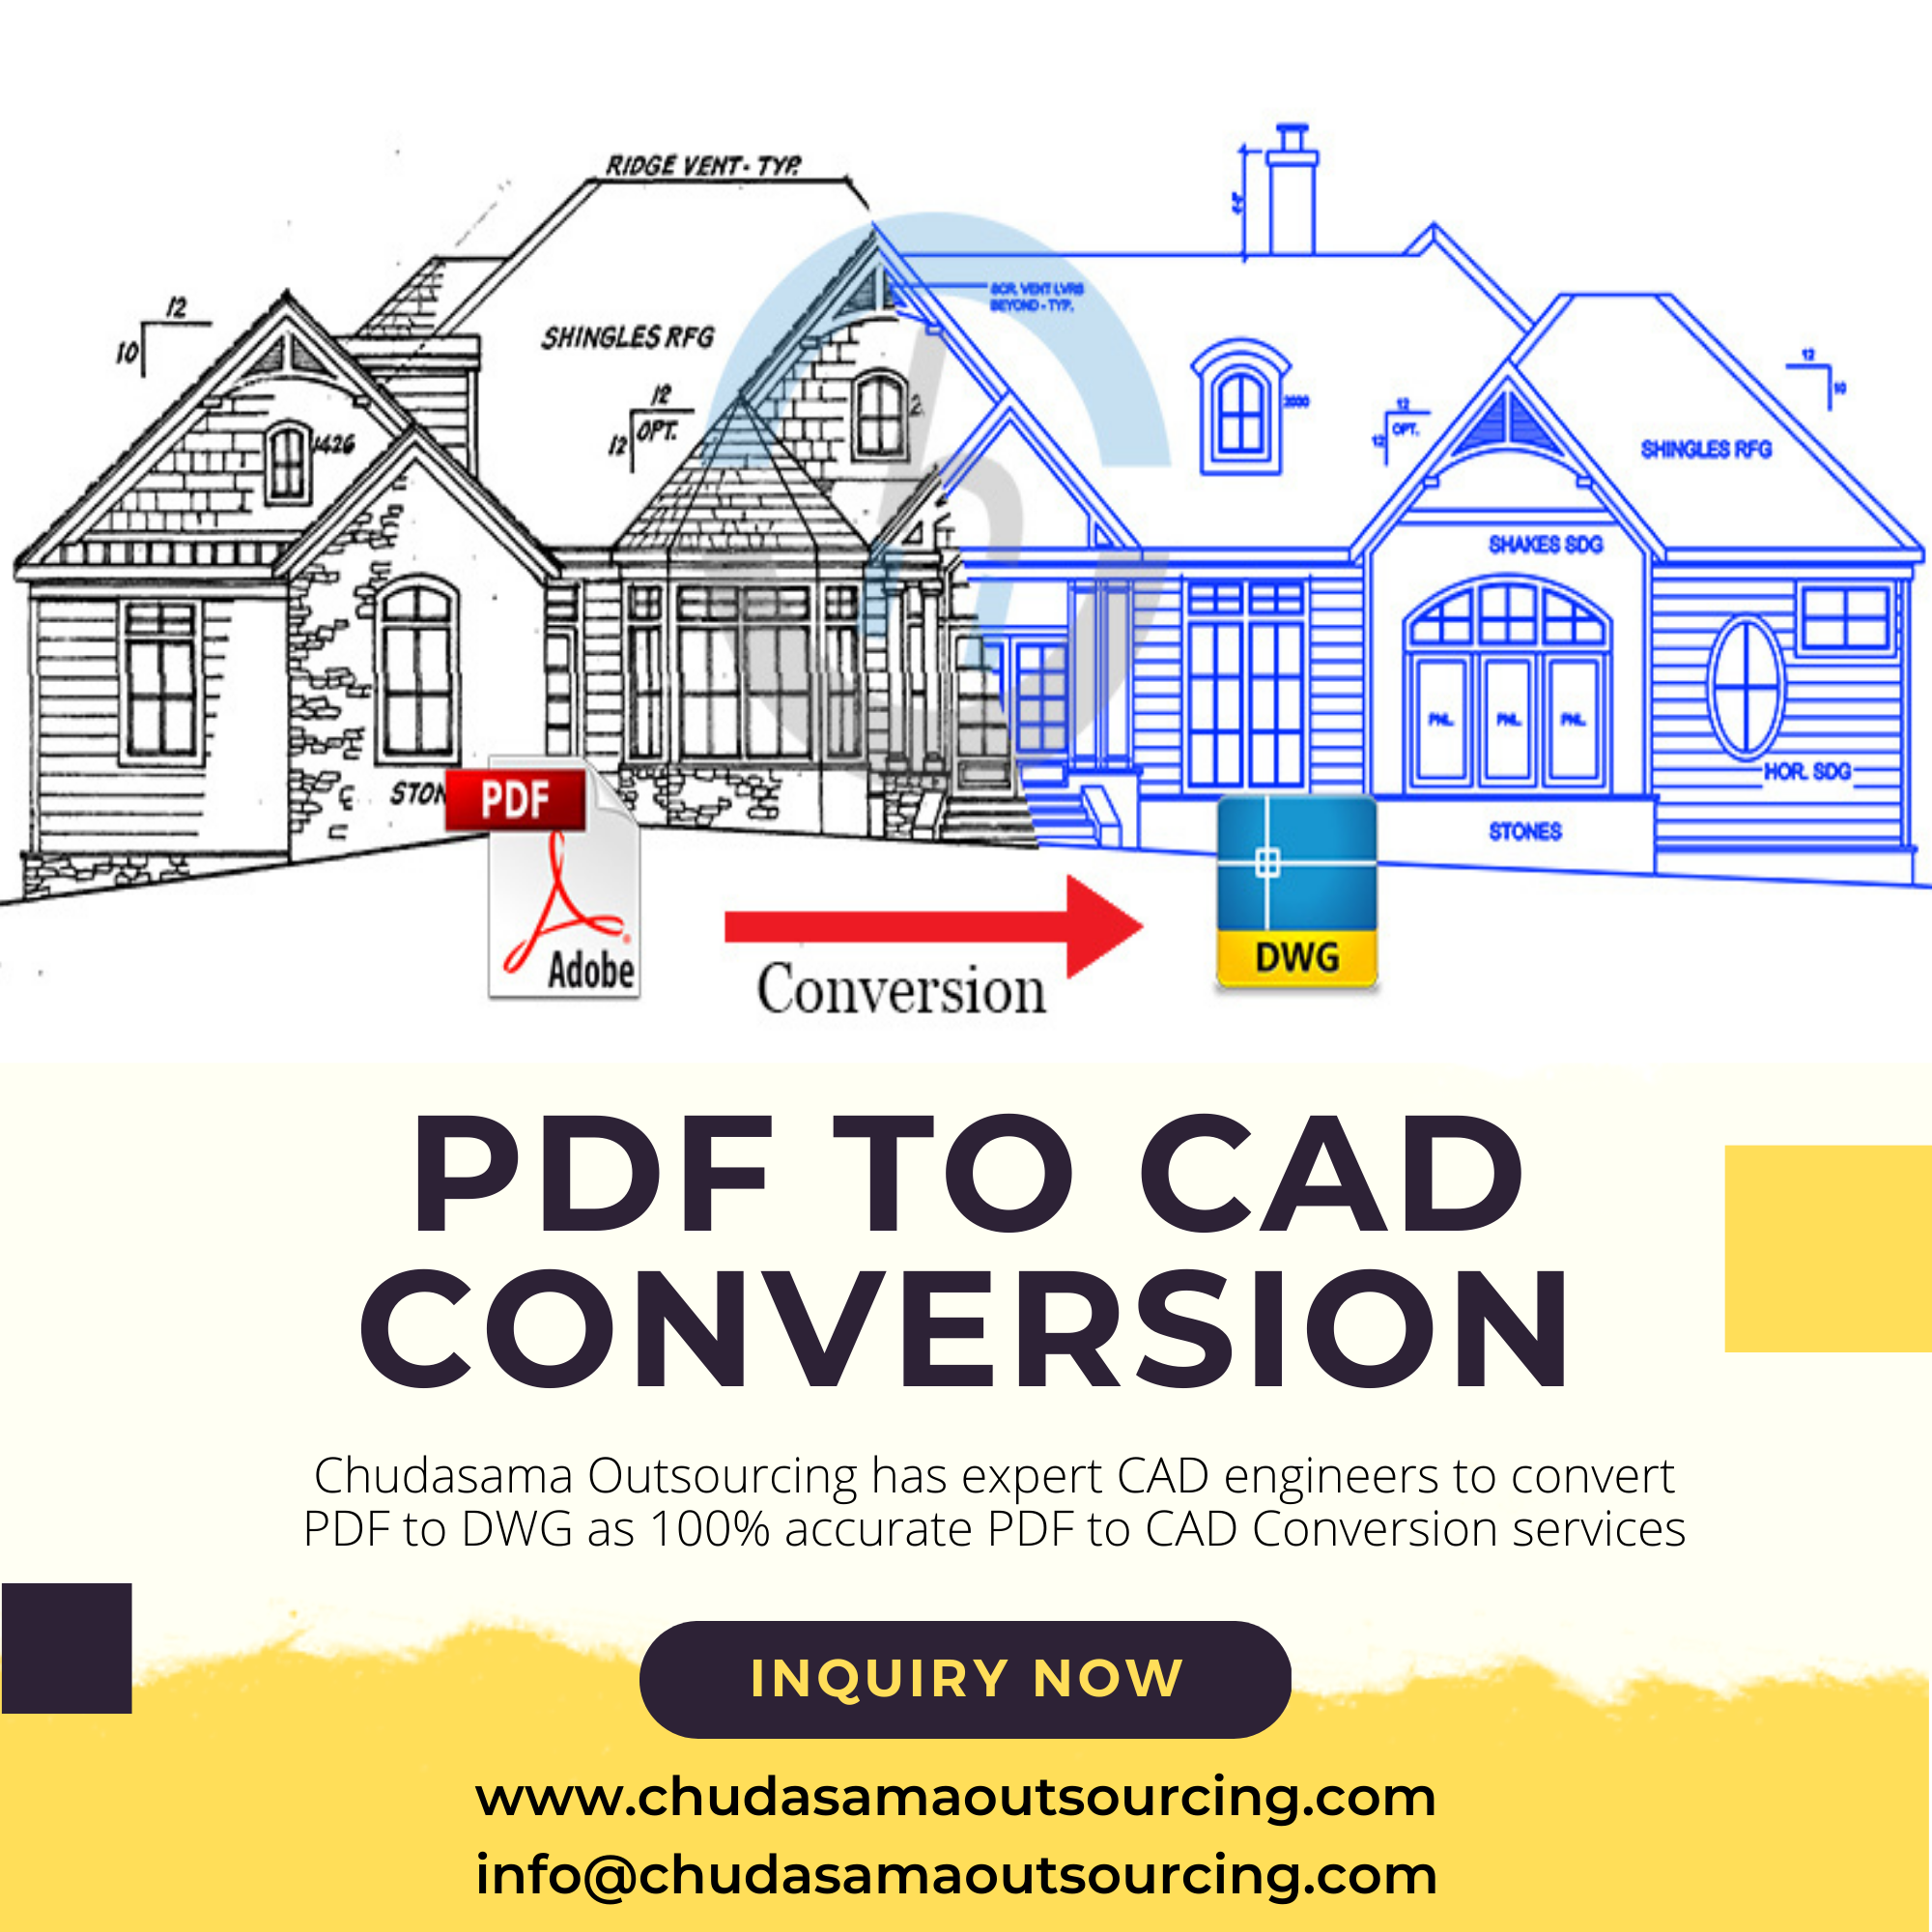 ’ di
fm
oe SHINGLES RFG
pa A
AK
AFR

 

 
 

7 hdobe Conversion

PDF TO CAD
CONVERSION

Chudasama Outsourcing has expert CAD engineers to convert
PDF to DWG as 100% accurate PDF to CAD Conversion services

BN INQUIRY NOW

www.chudasamaoutsourcing.com
info@chudasamaoutsourcing.com